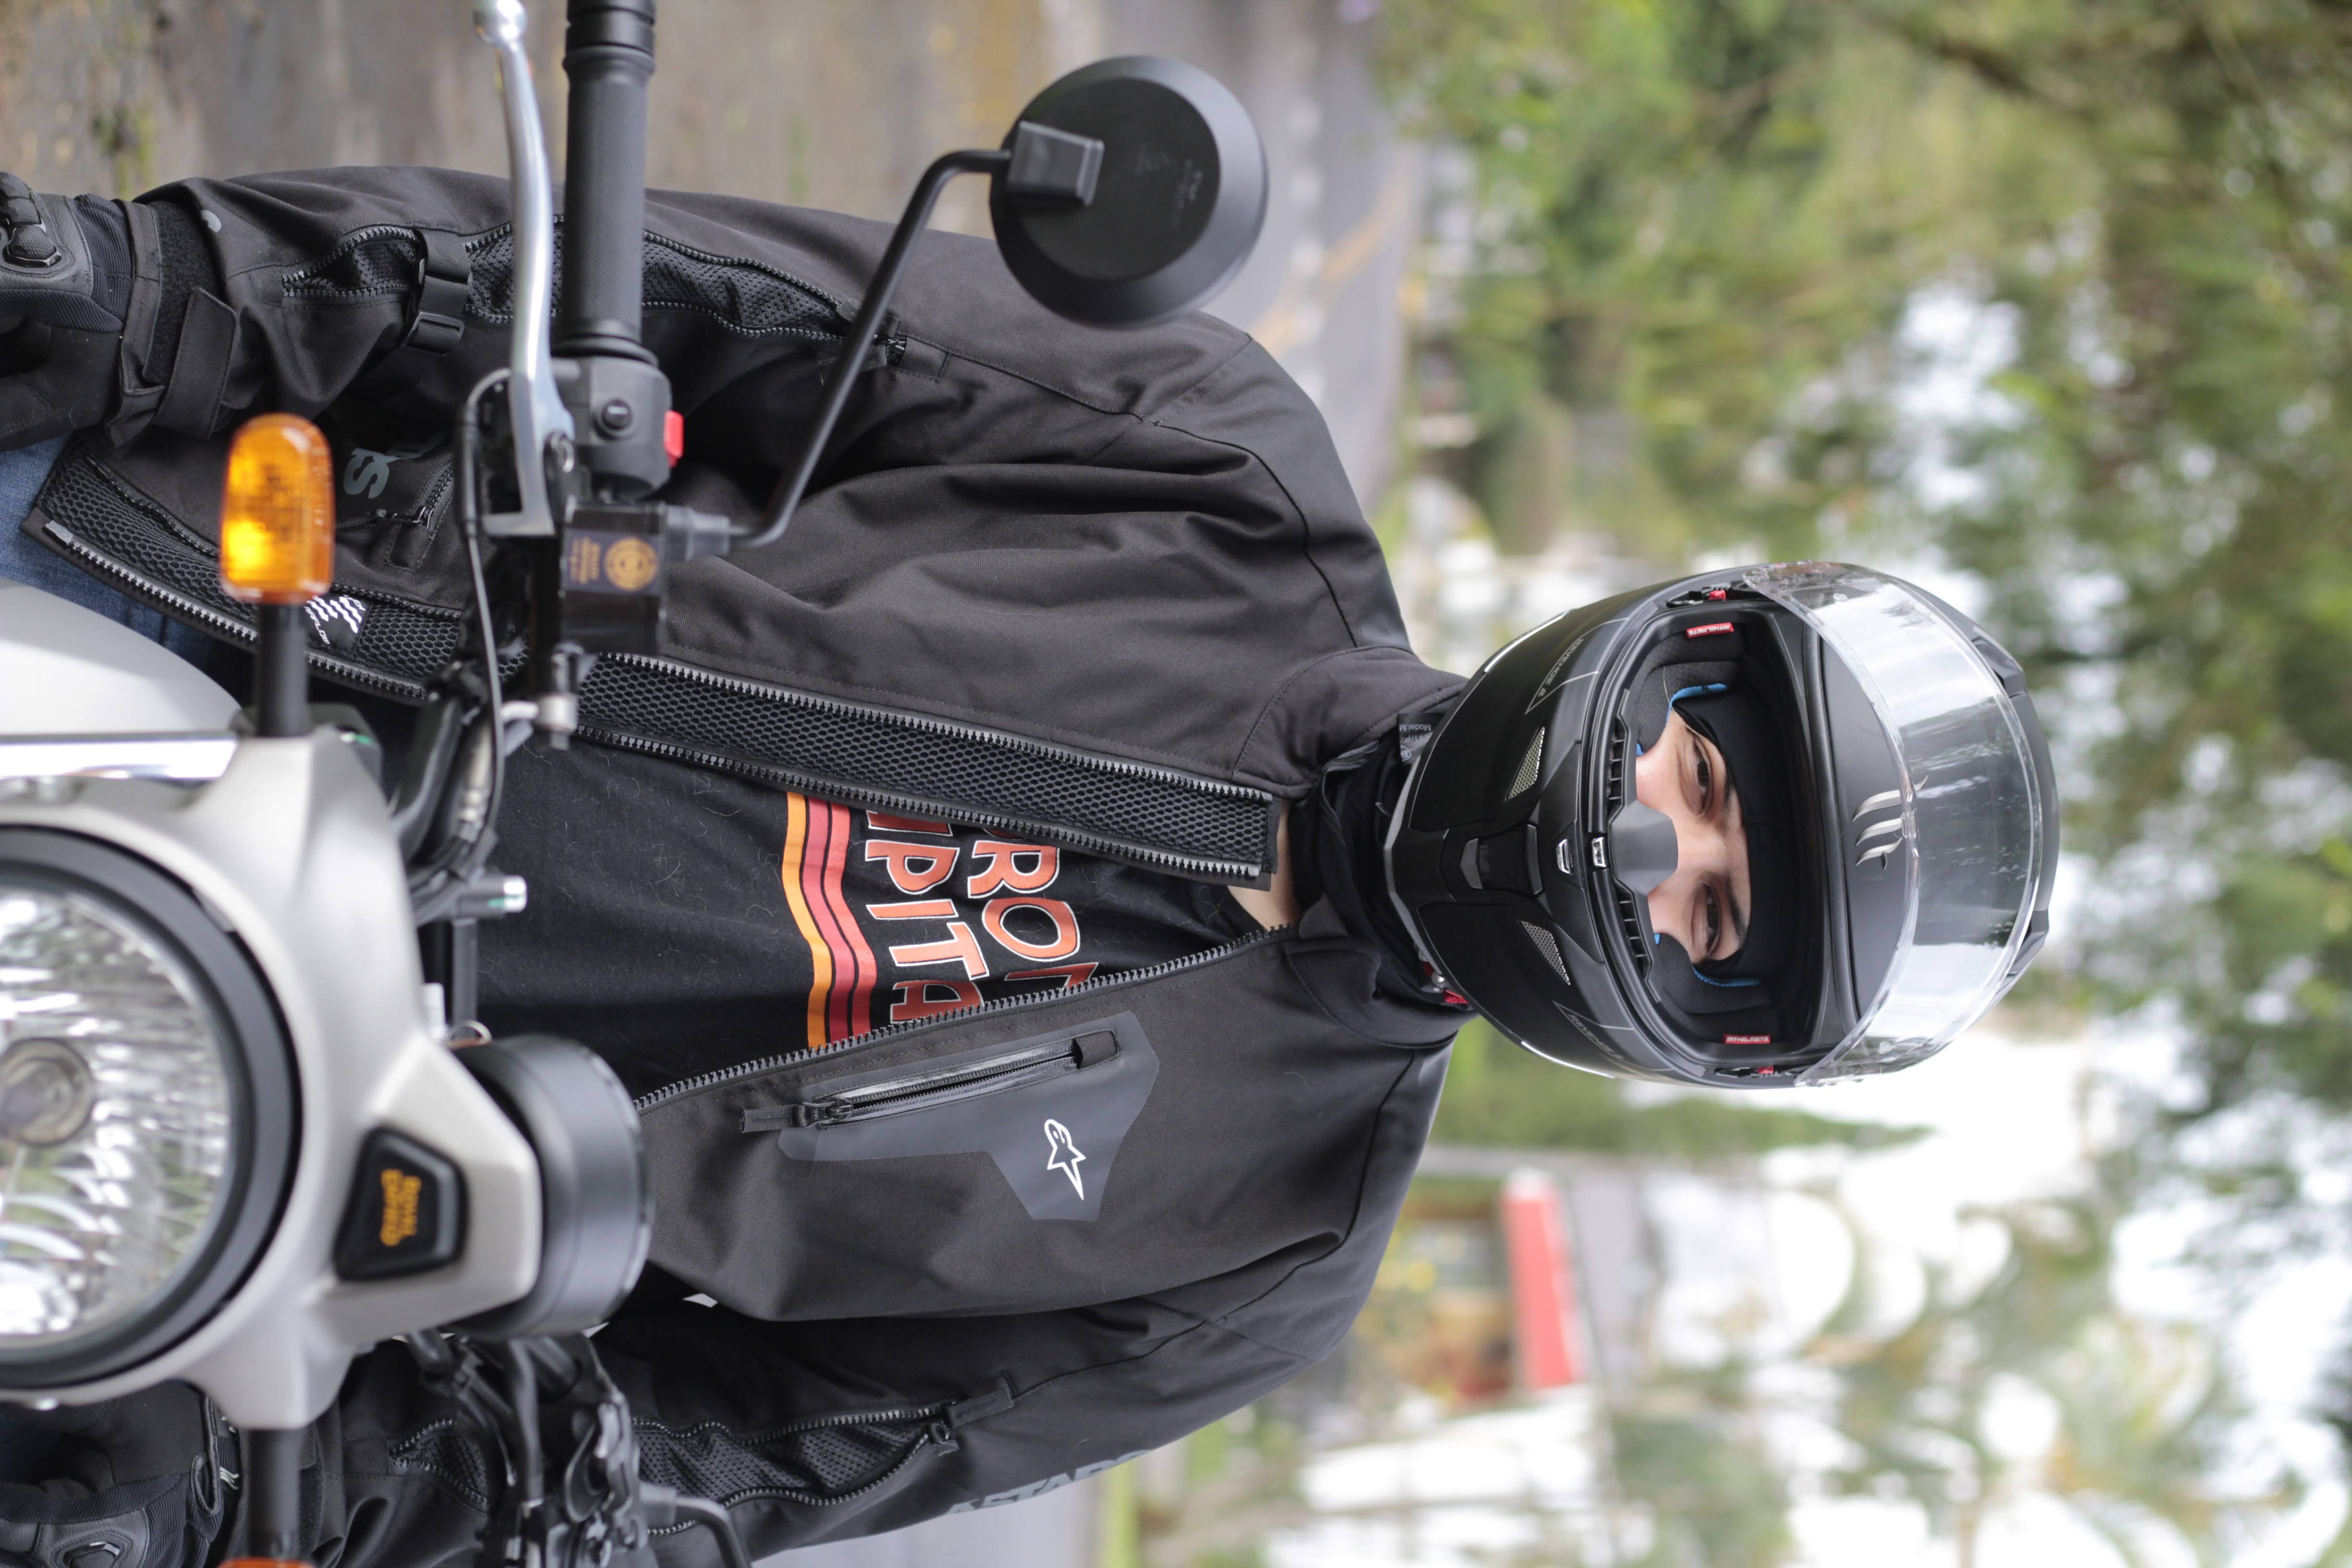 Picture of me on my motorcycle. The motorcycle is a Royal Enfield Scram 411.